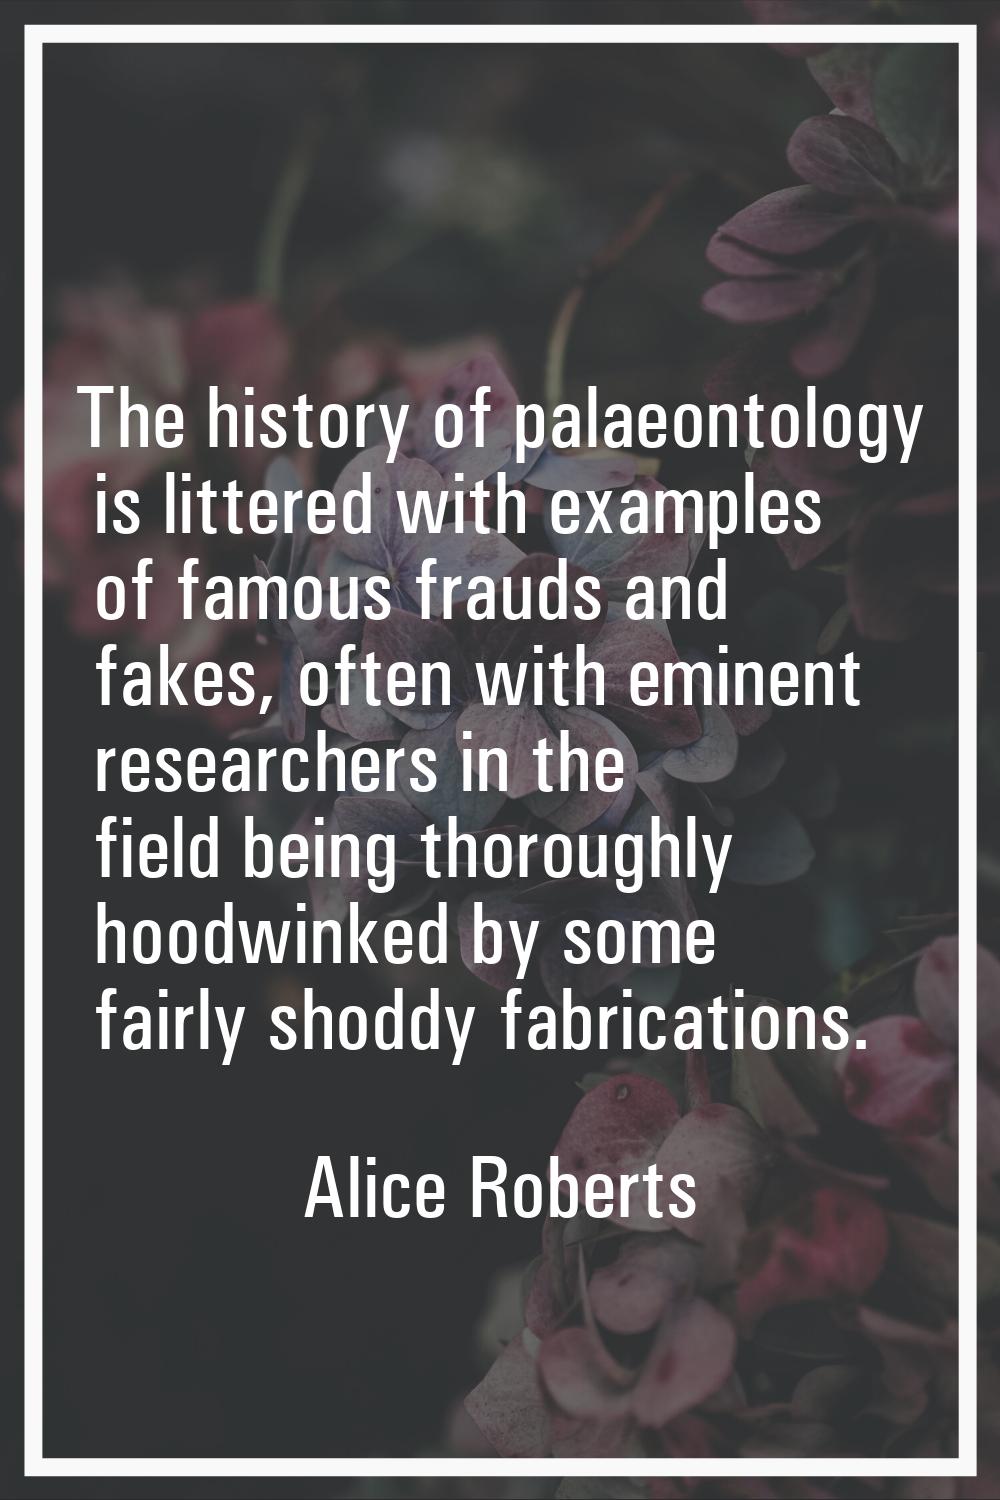 The history of palaeontology is littered with examples of famous frauds and fakes, often with emine